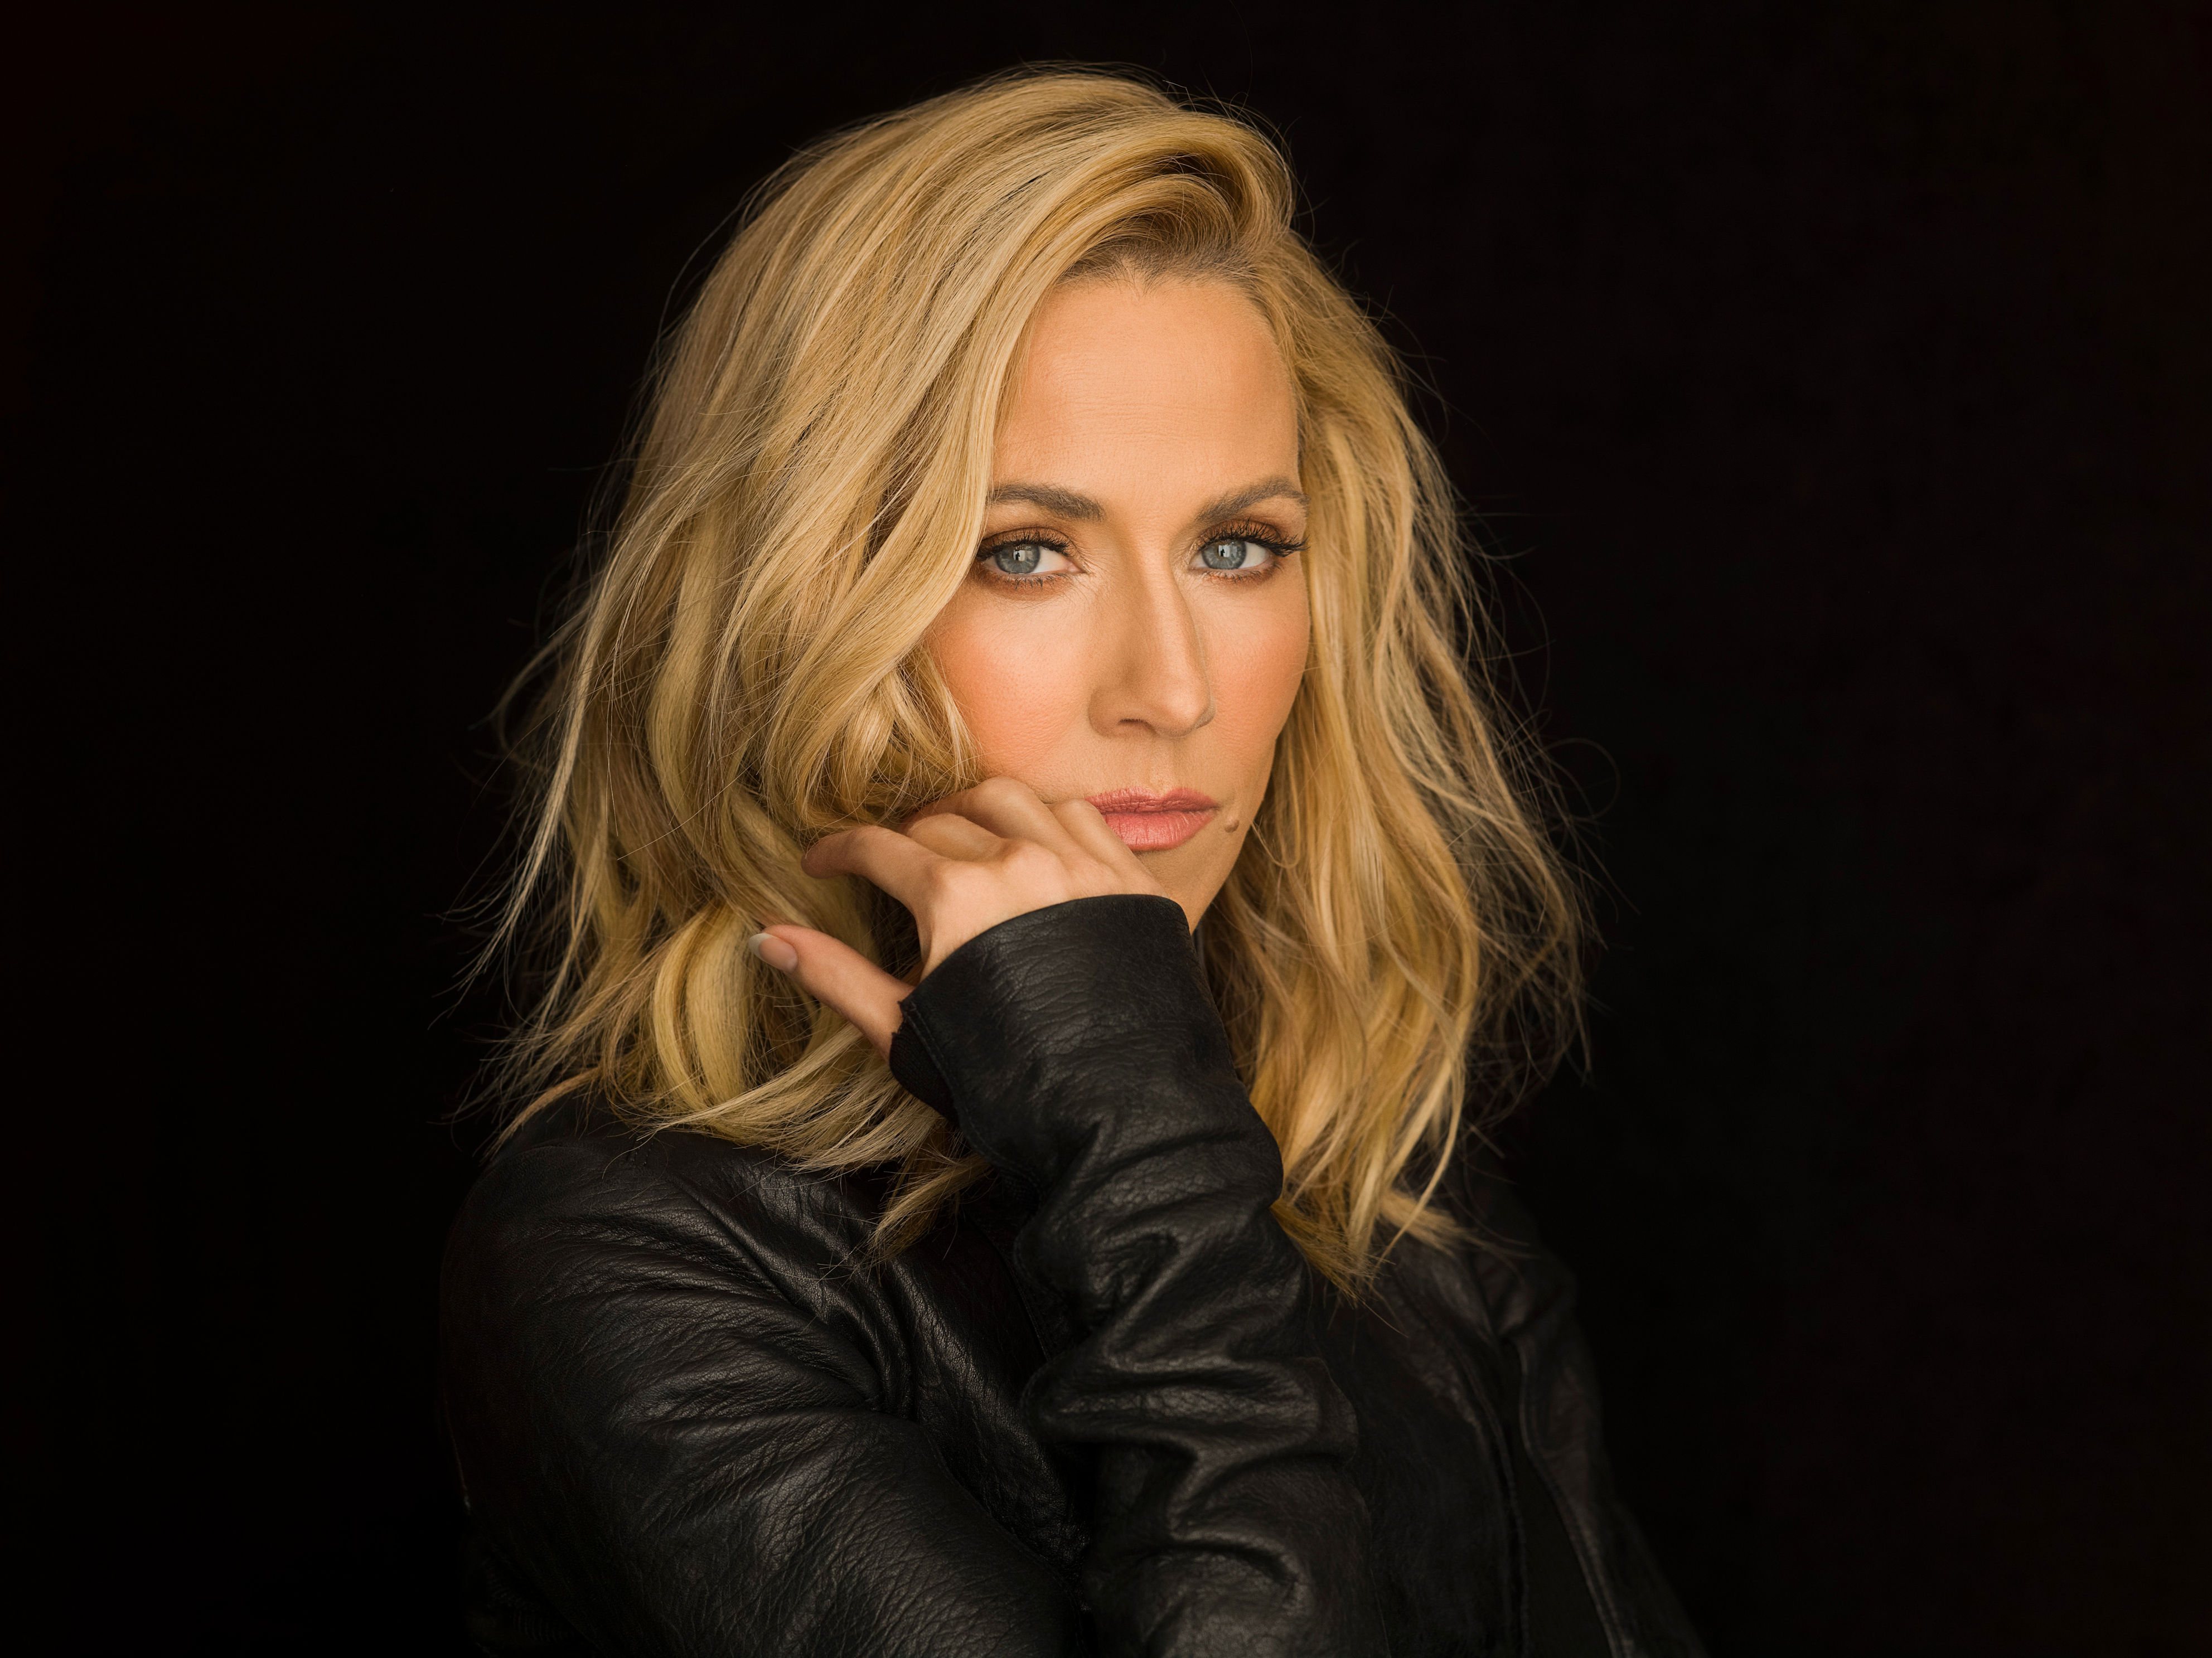 sheryl crow reflects on the strange way drugs shaped her music career